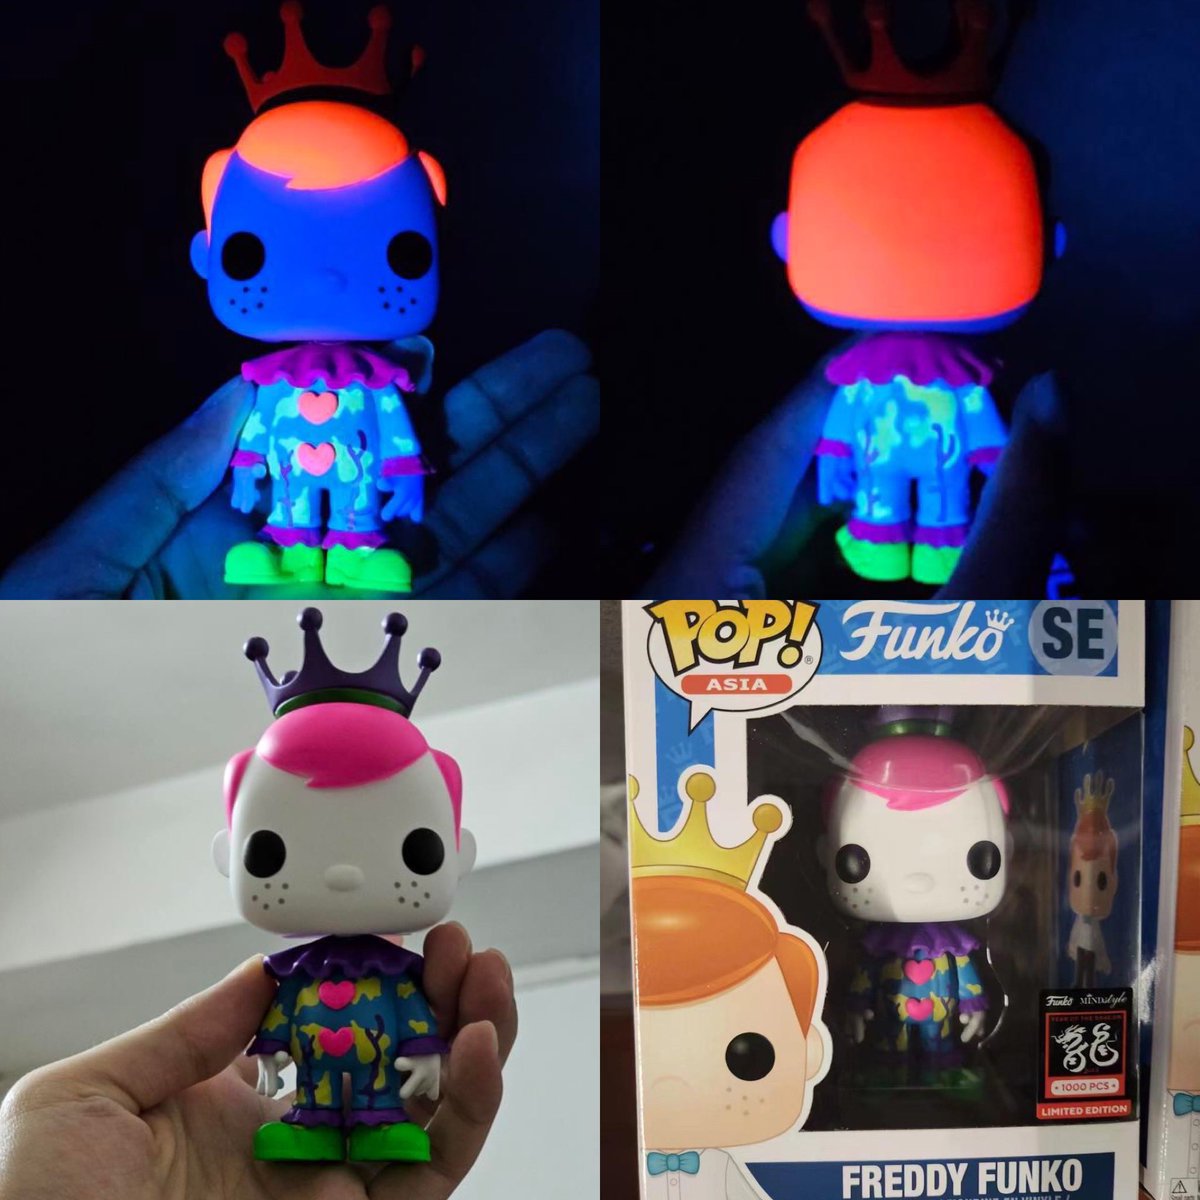 Check out this Freddy Funko under the Blacklight!
.
Credit @kaihong_11
#Funko #FunkoPop #FunkoPopVinyl #Pop #PopVinyl #Collectibles #Collectible #FunkoCollector #FunkoPops #Collector #Toy #Toys #DisTrackers